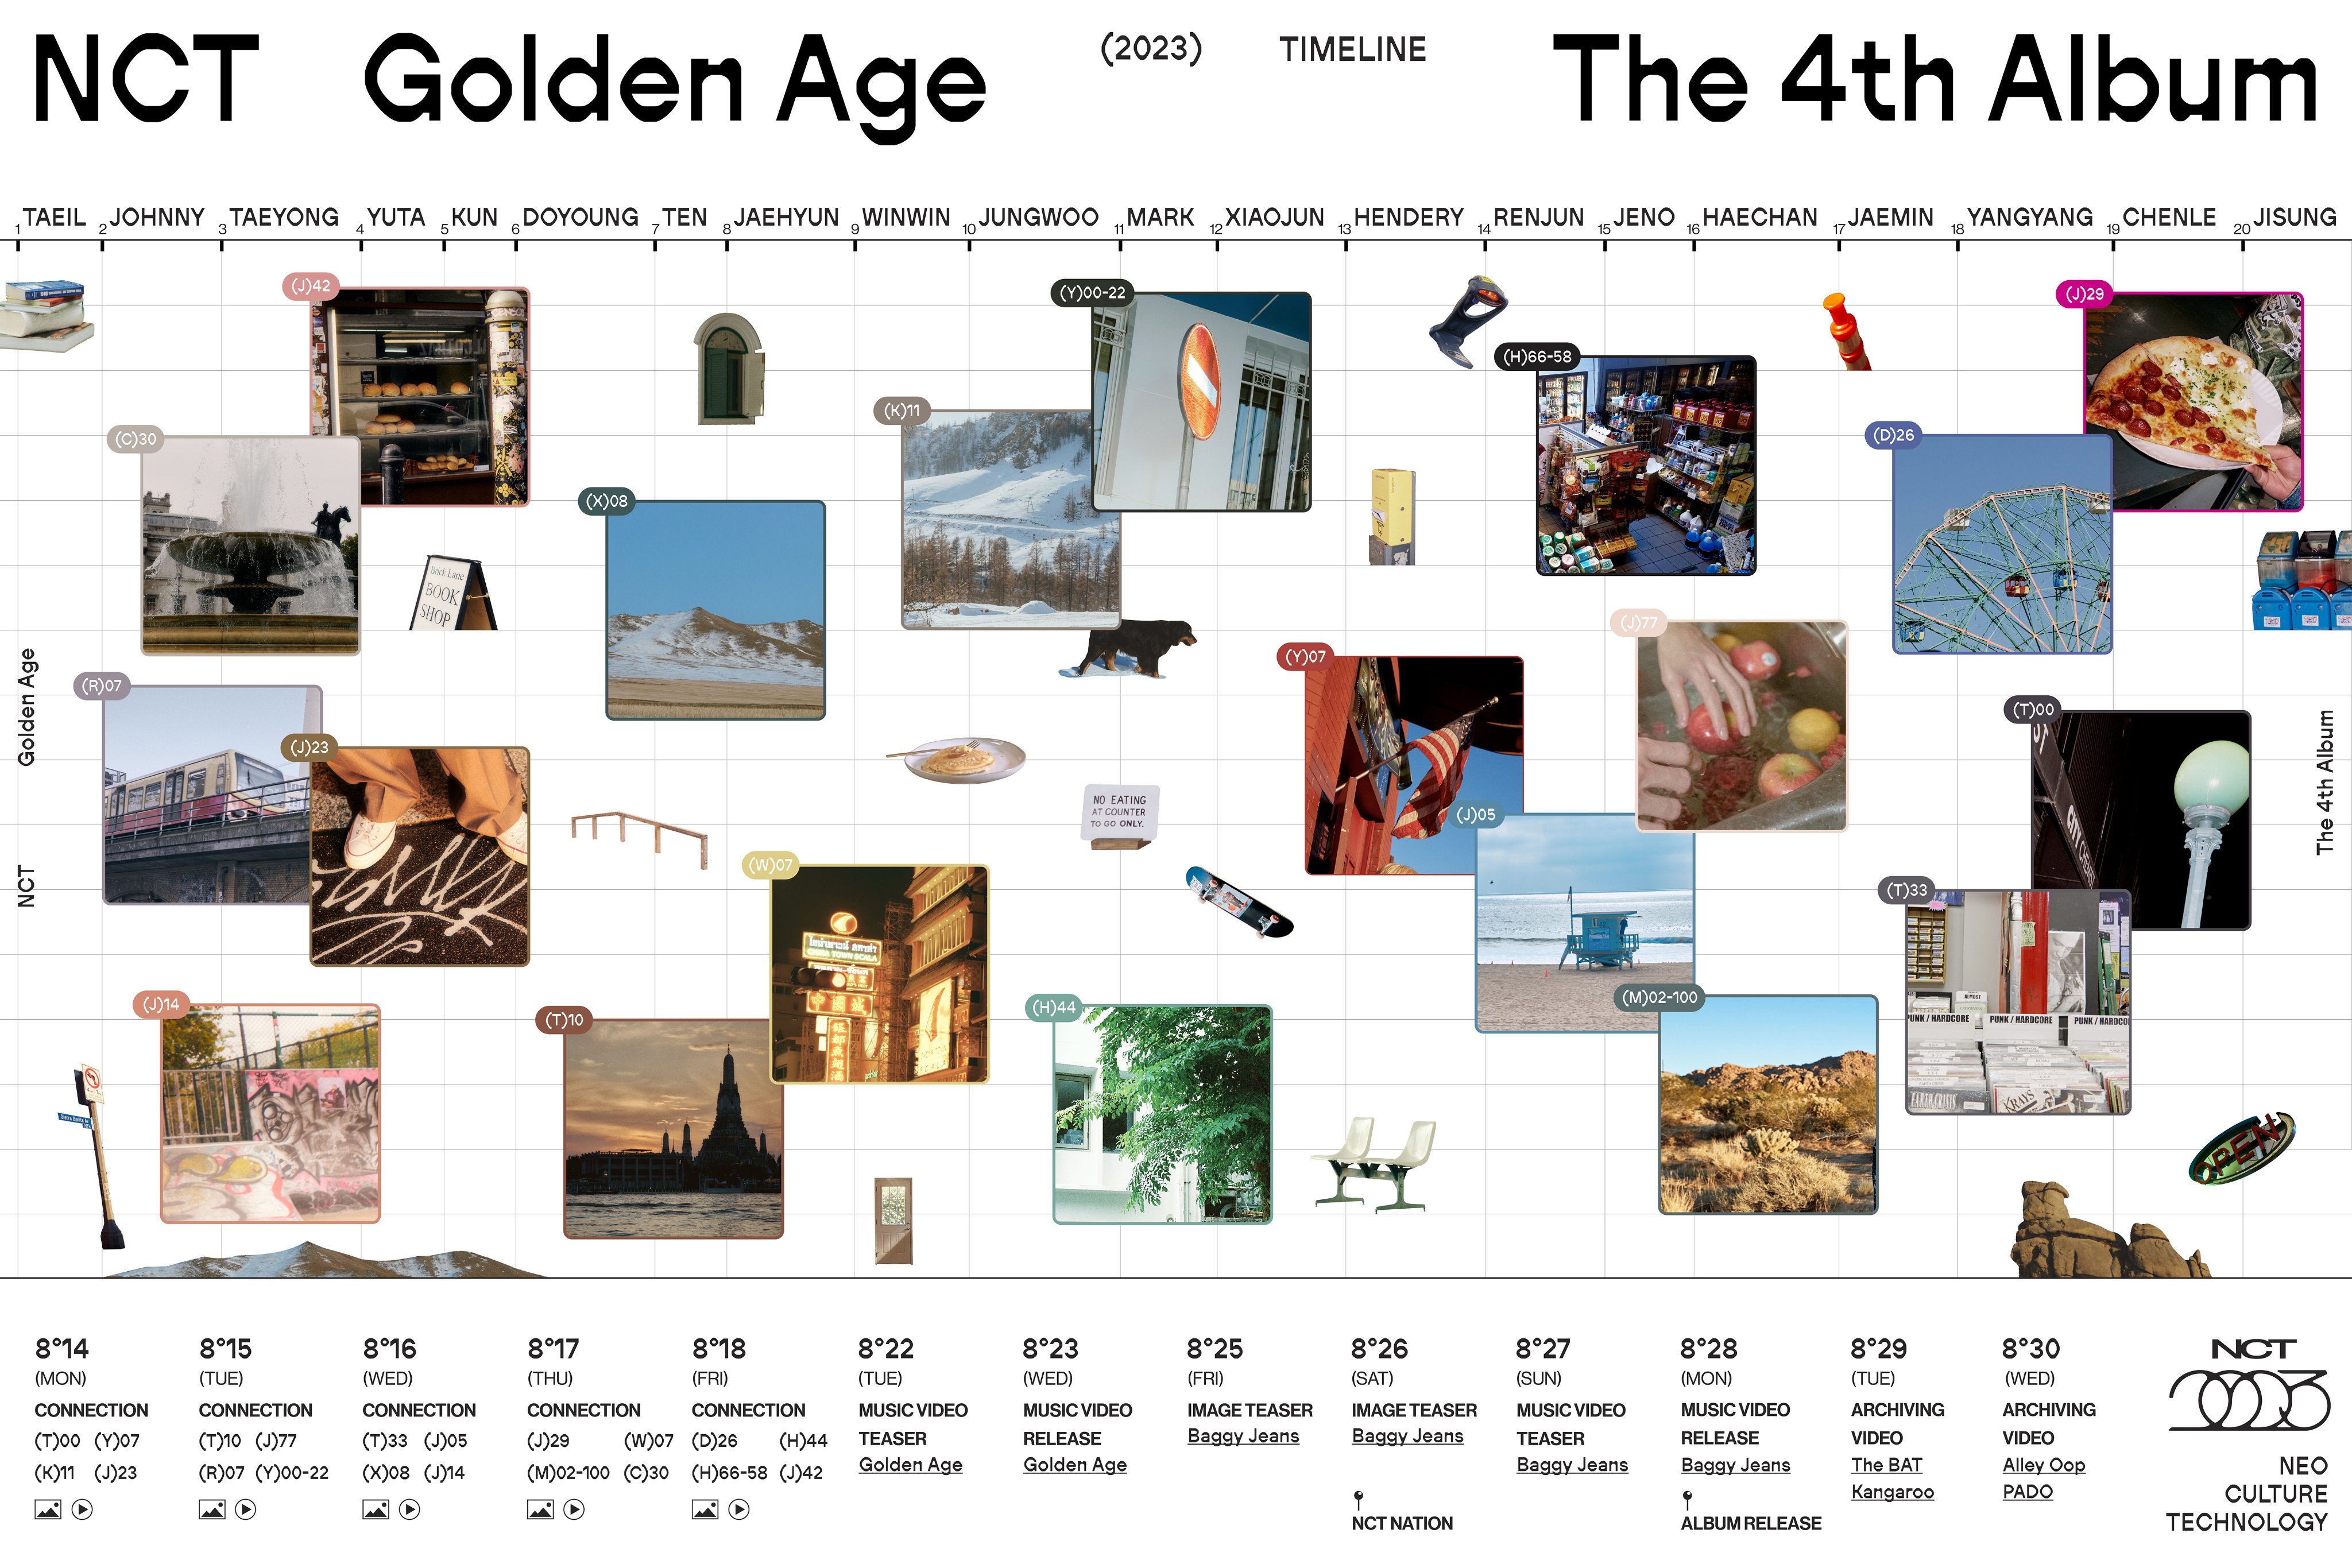 &lsquo;Golden Age&rsquo; TIMELINE POSTER